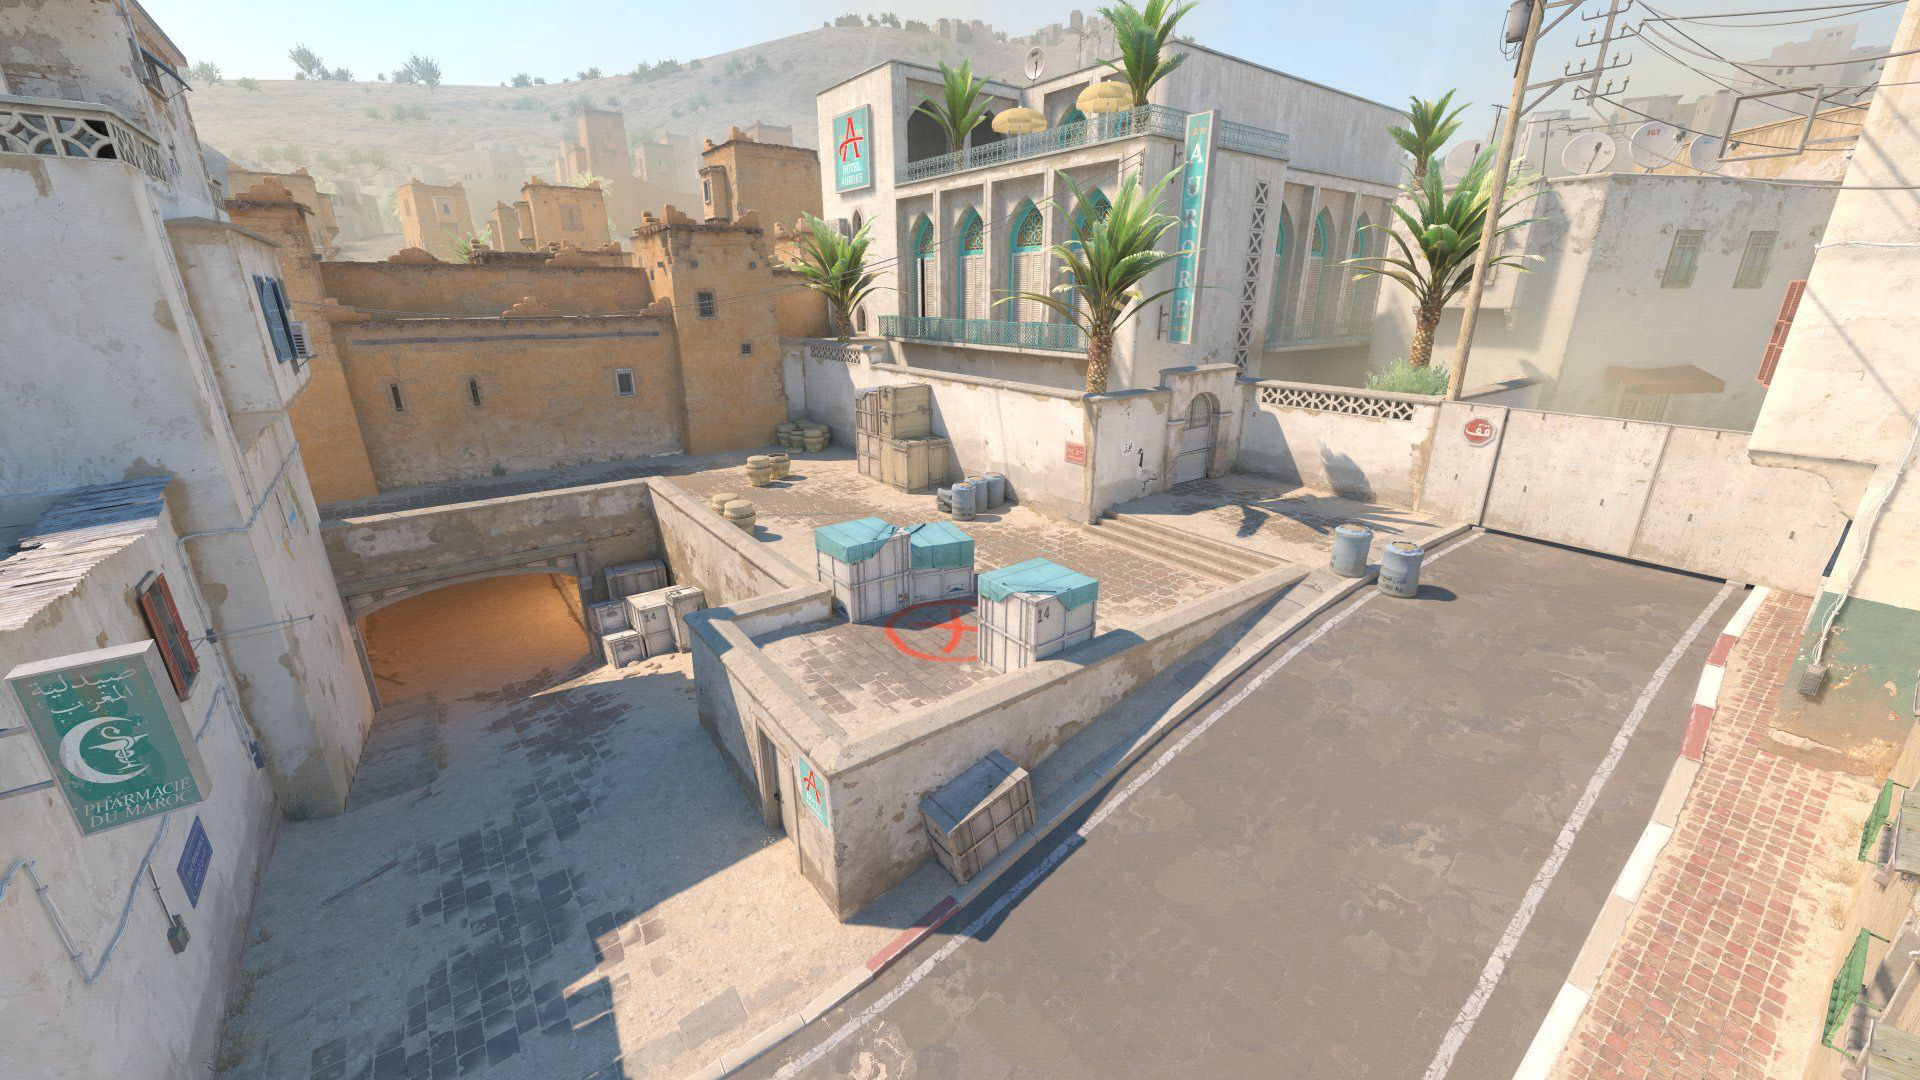 CS:GO Update Replaces Dust 2 with Anubis in the Active Duty Map